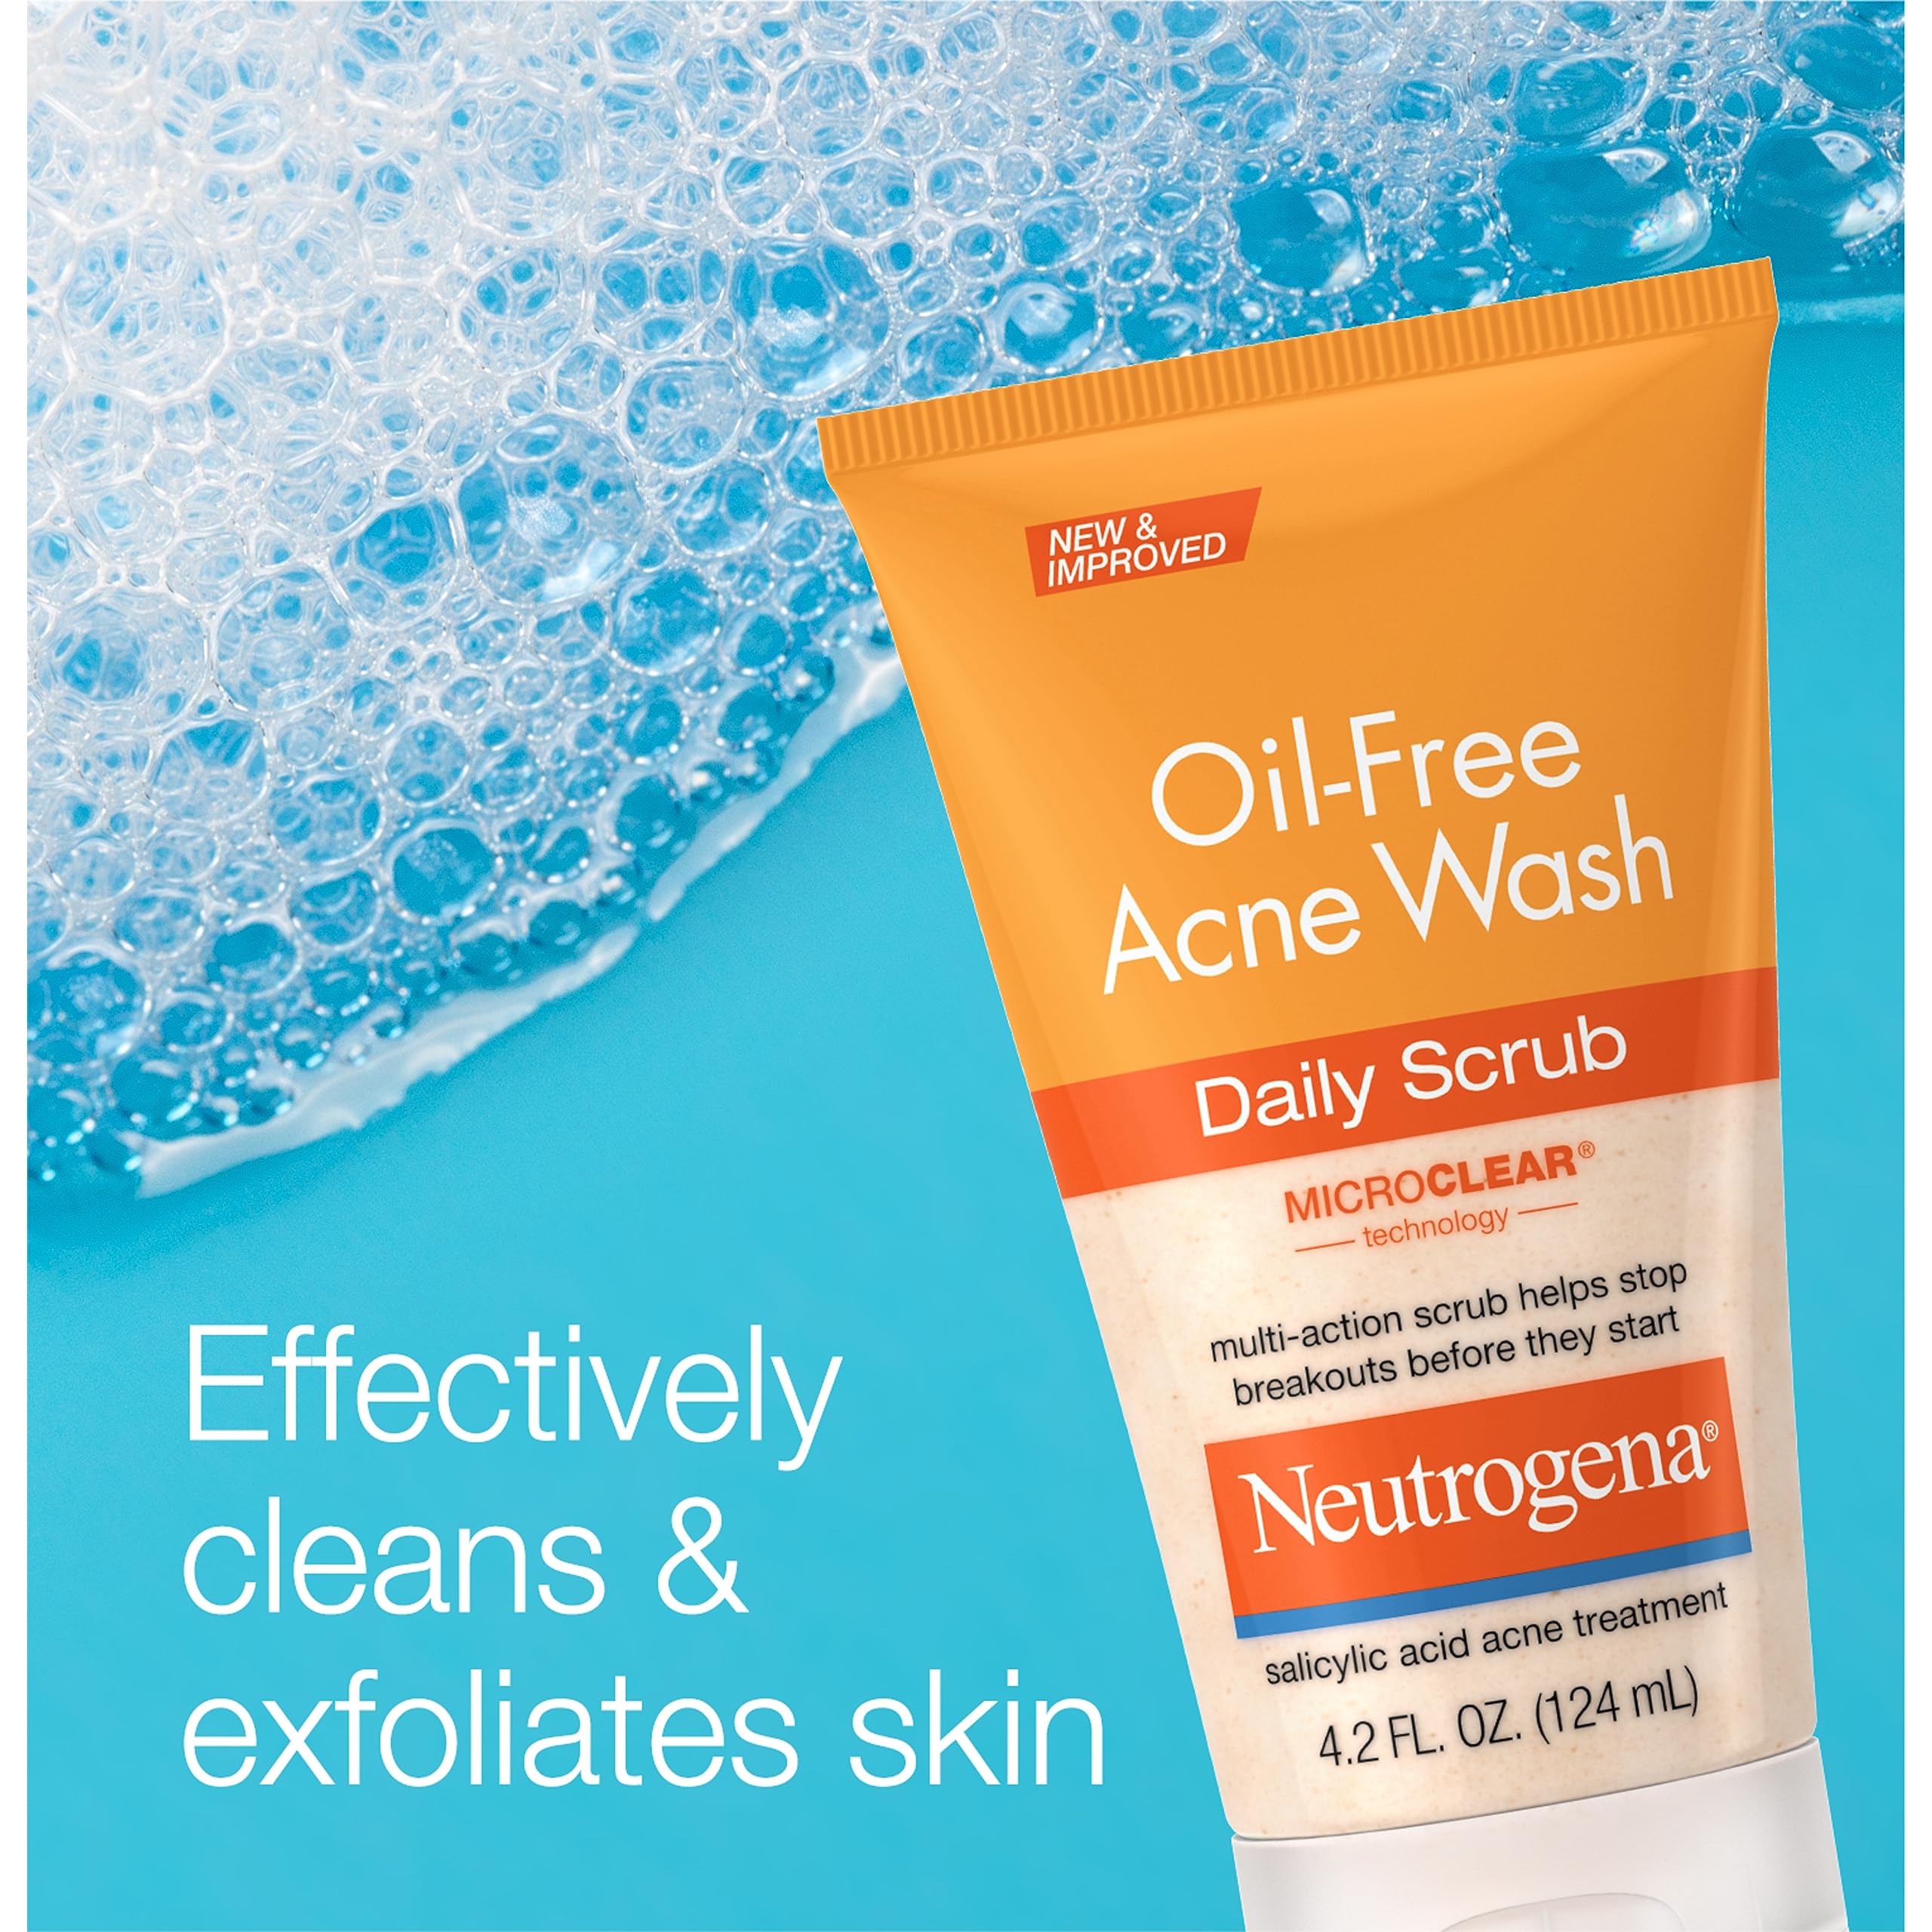 Neutrogena Oil-Free Acne Face Scrub, 2% Salicylic Acid Acne Treatment, Daily Face Wash to help Prevent Breakouts, Exfoliating Facial Cleanser for Acne-Prone Skin, Twin Pack, 2 x 4.2 fl. Oz